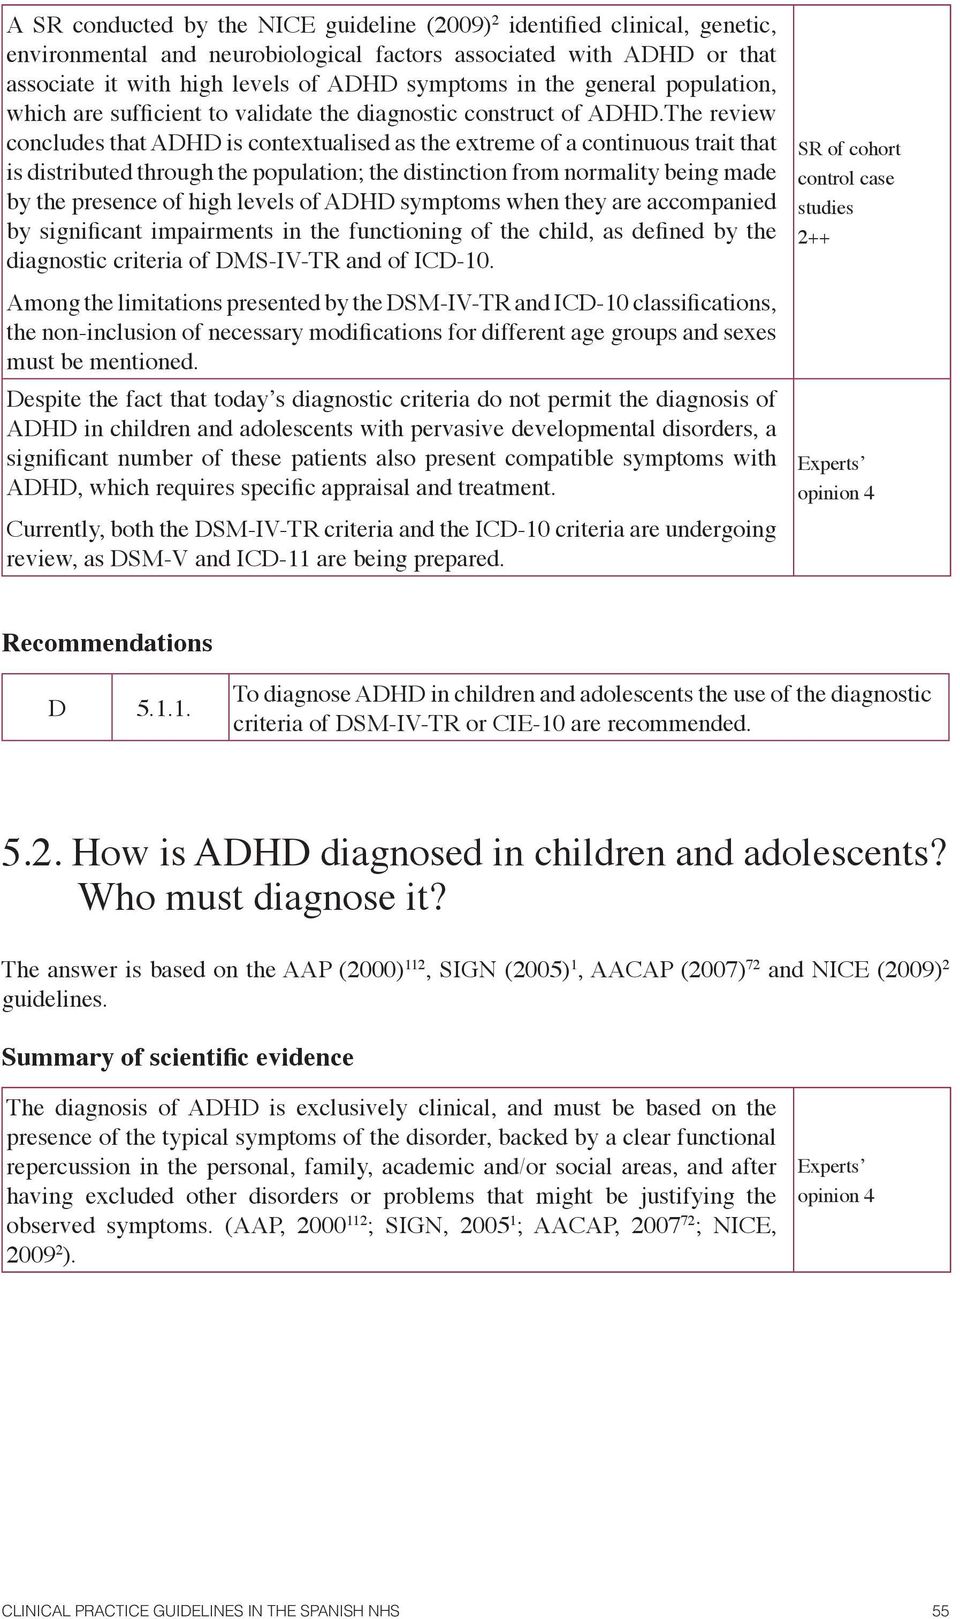 The review concludes that ADHD is contextualised as the extreme of a continuous trait that is distributed through the population; the distinction from normality being made by the presence of high